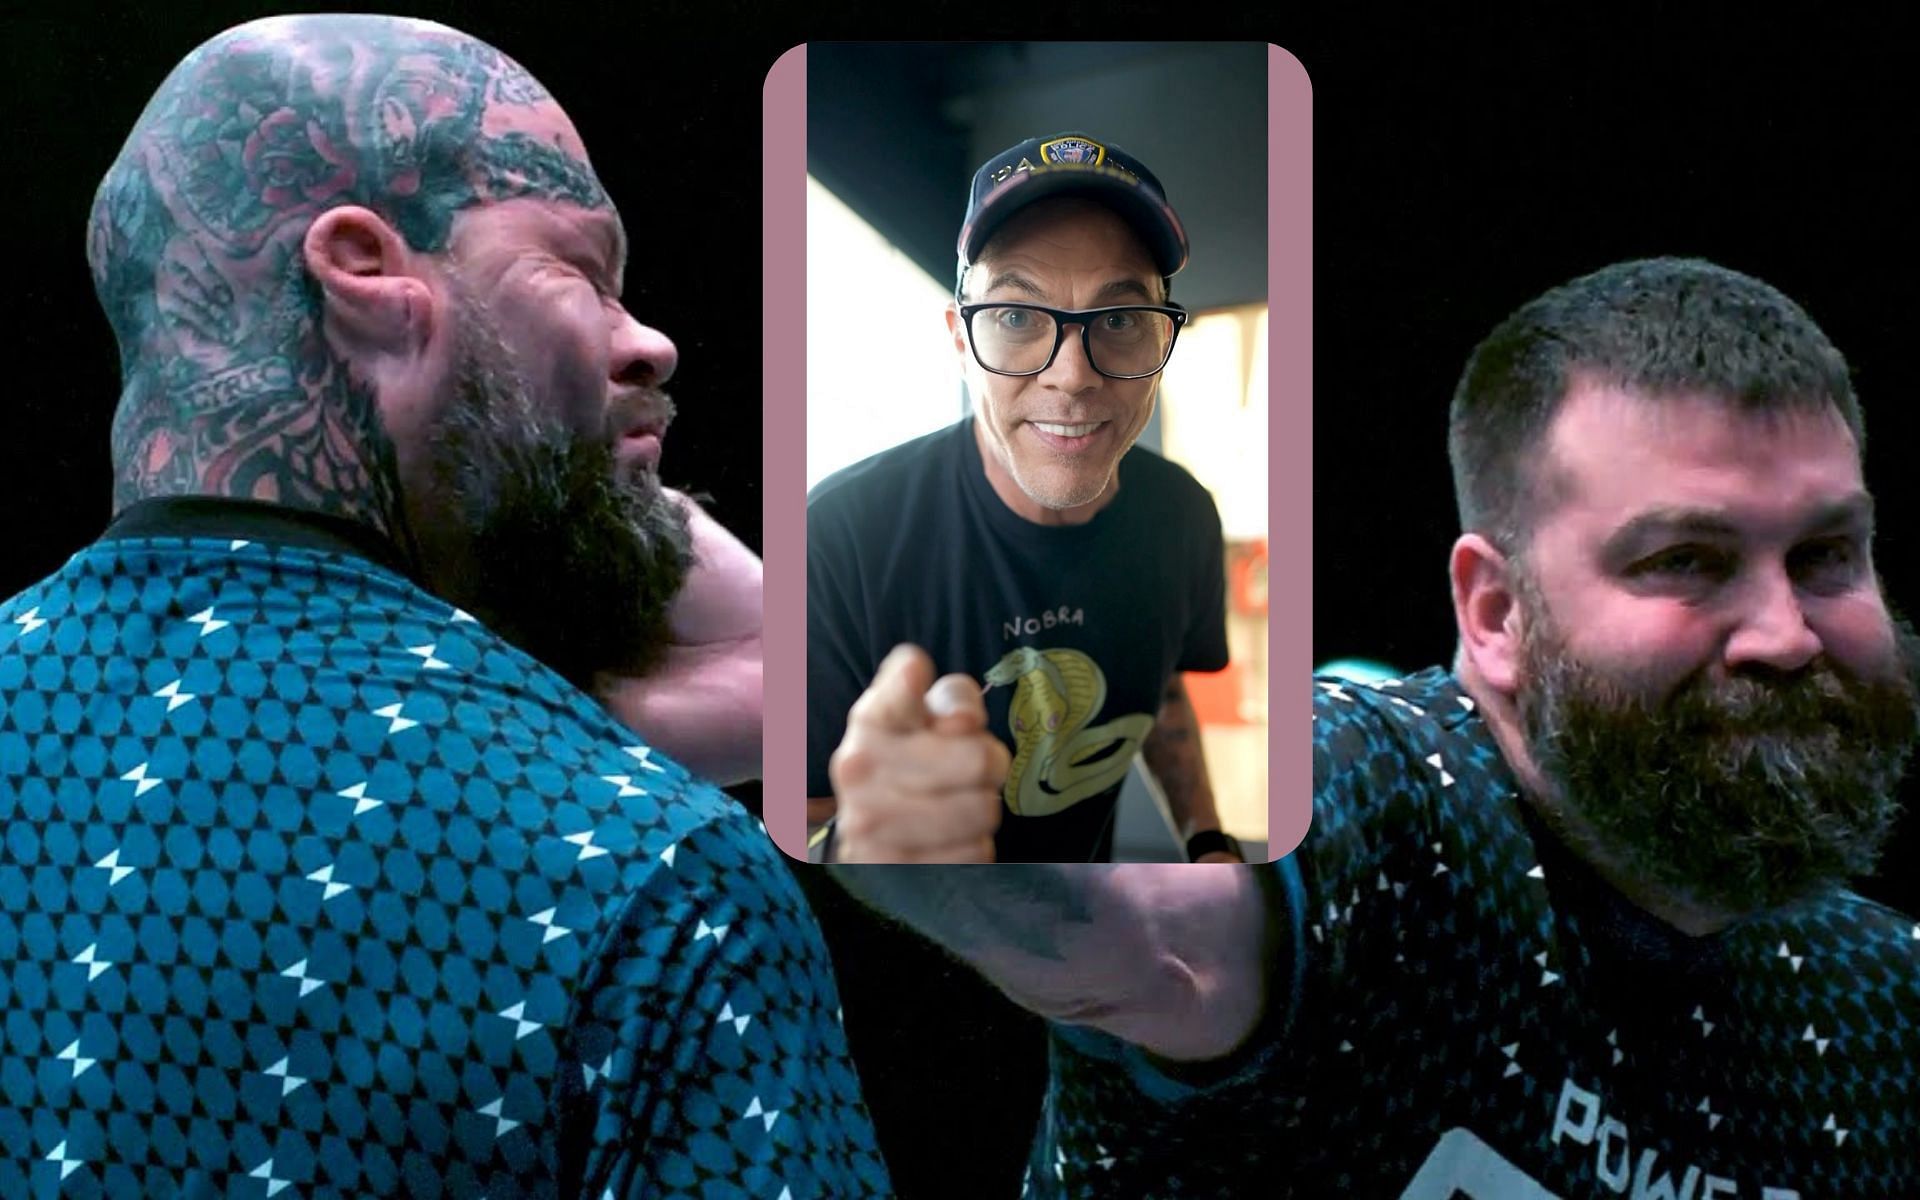 Steve-O shares insane self-slapping idea to knock himself out in new Dana White